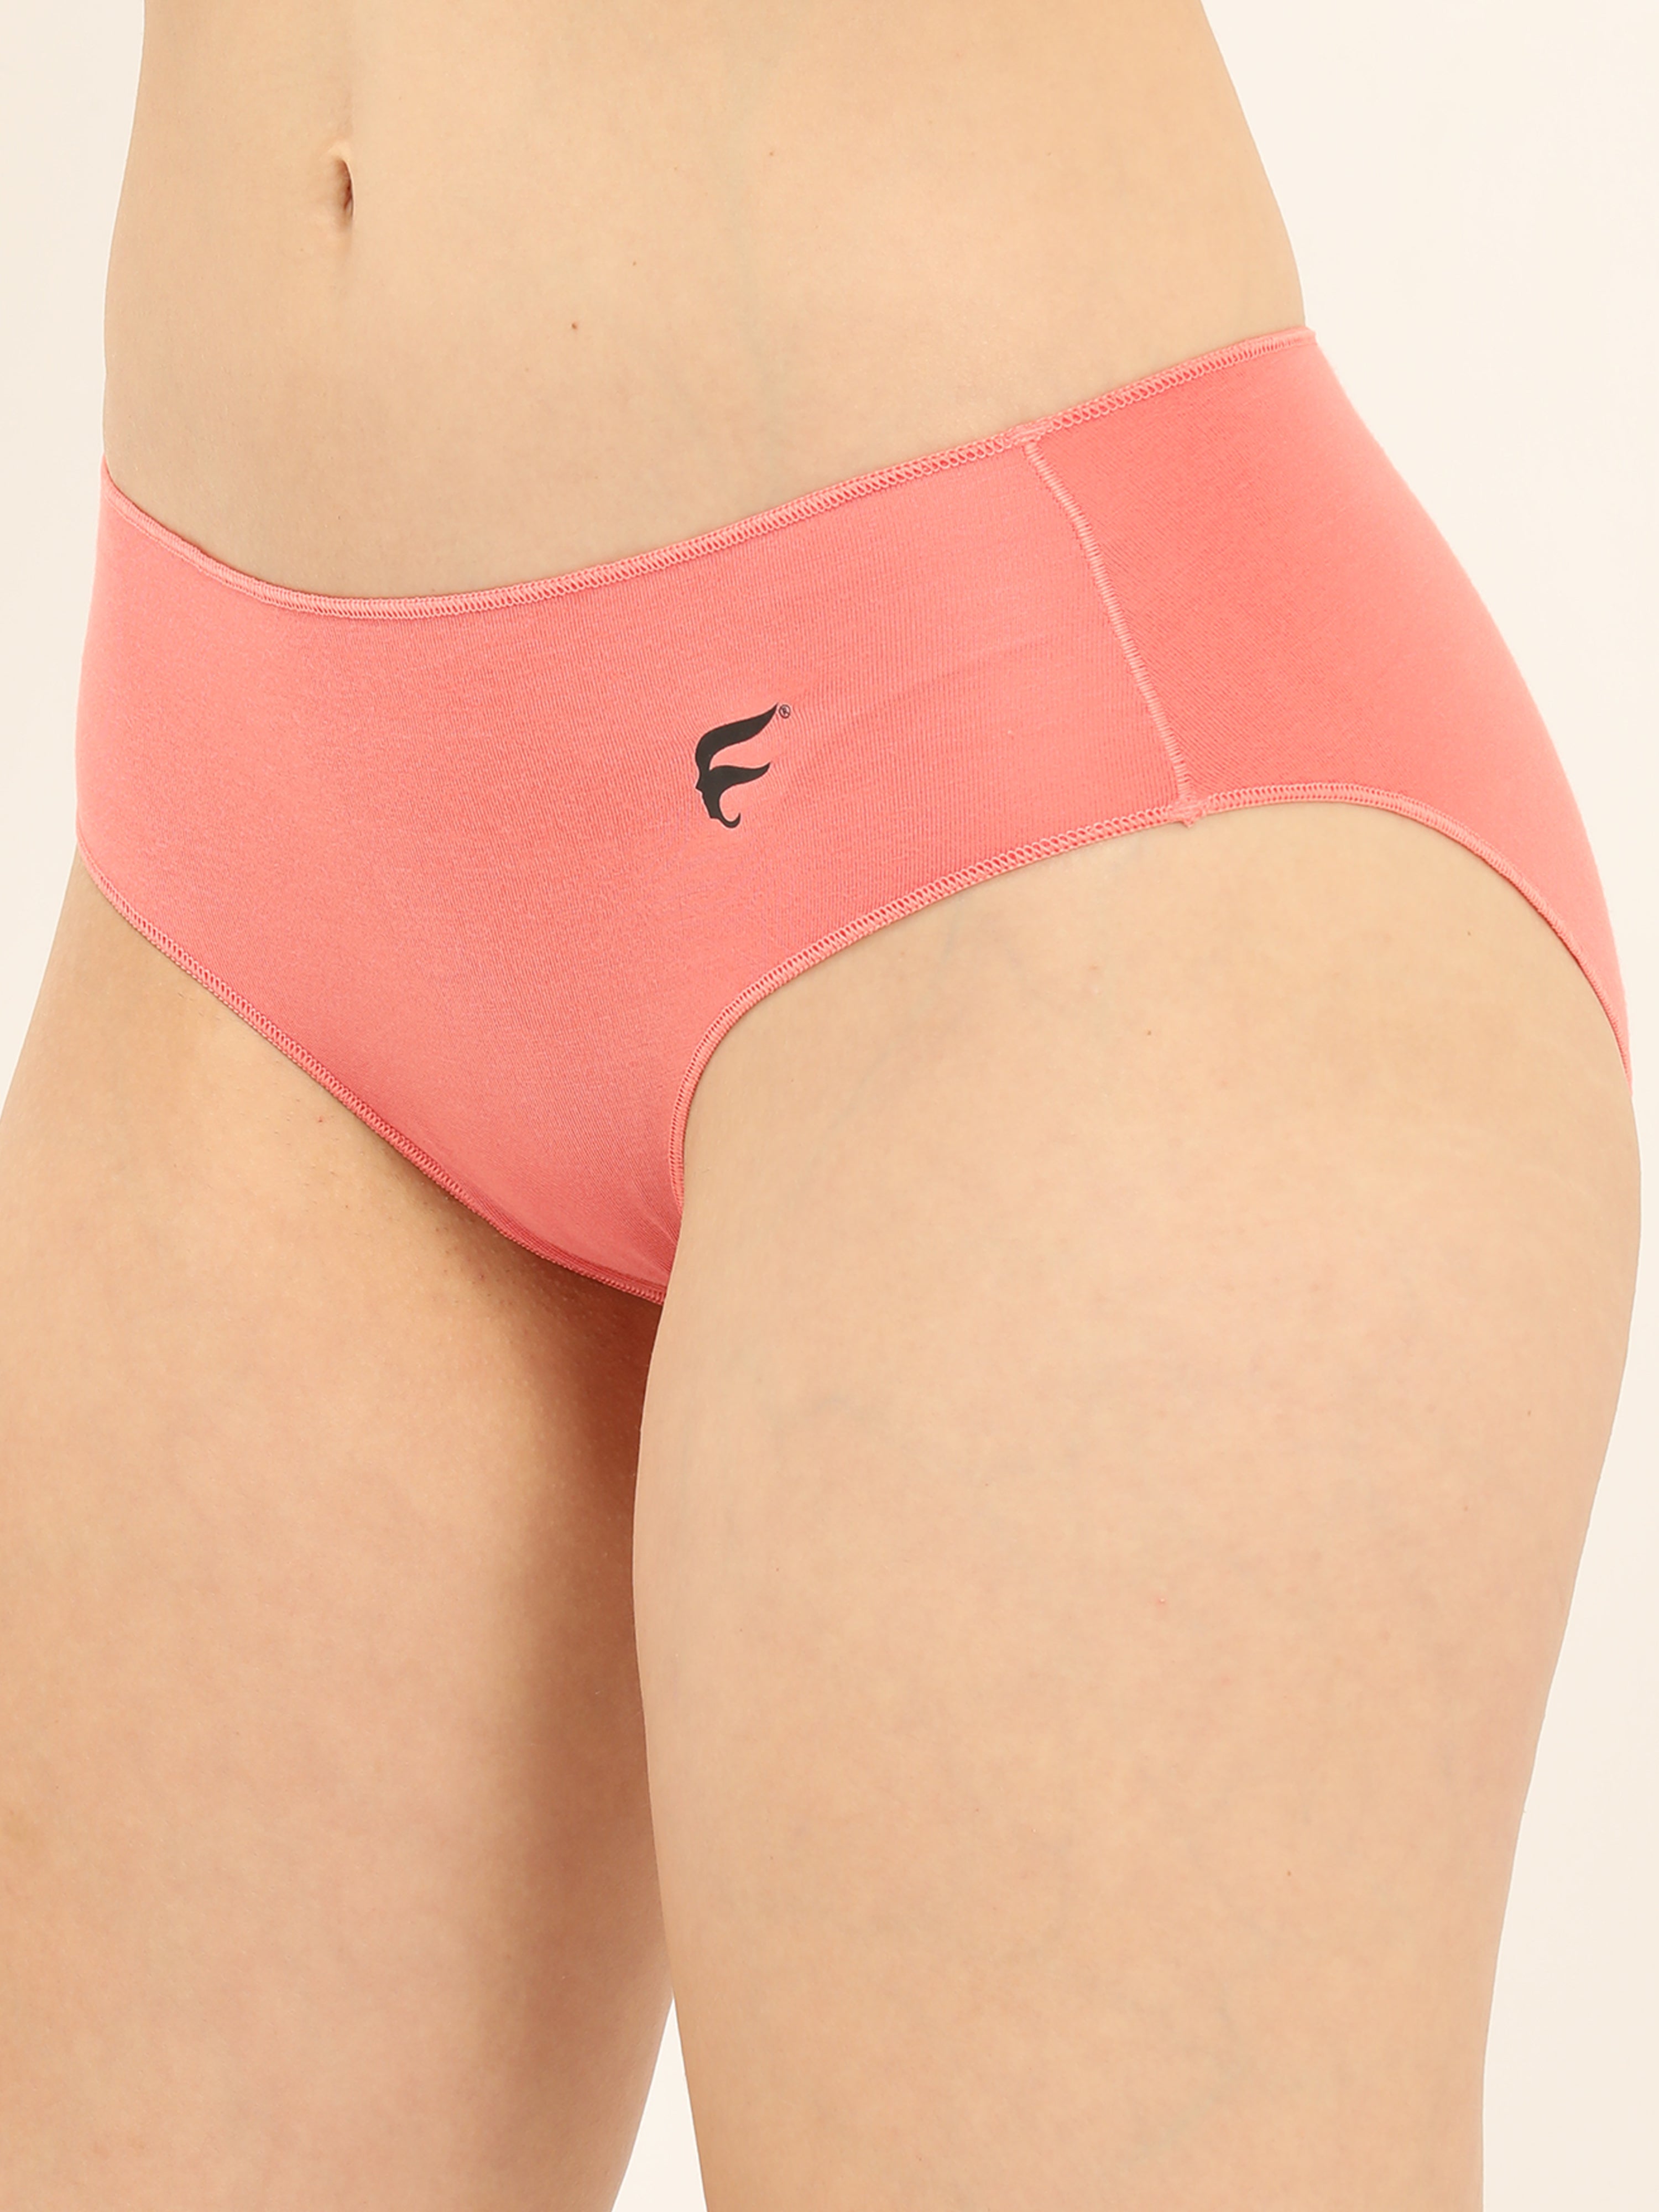 Envie Hipster, Full coverage panty, Super Soft Modal fabric for soft touch comfort Pack of 3